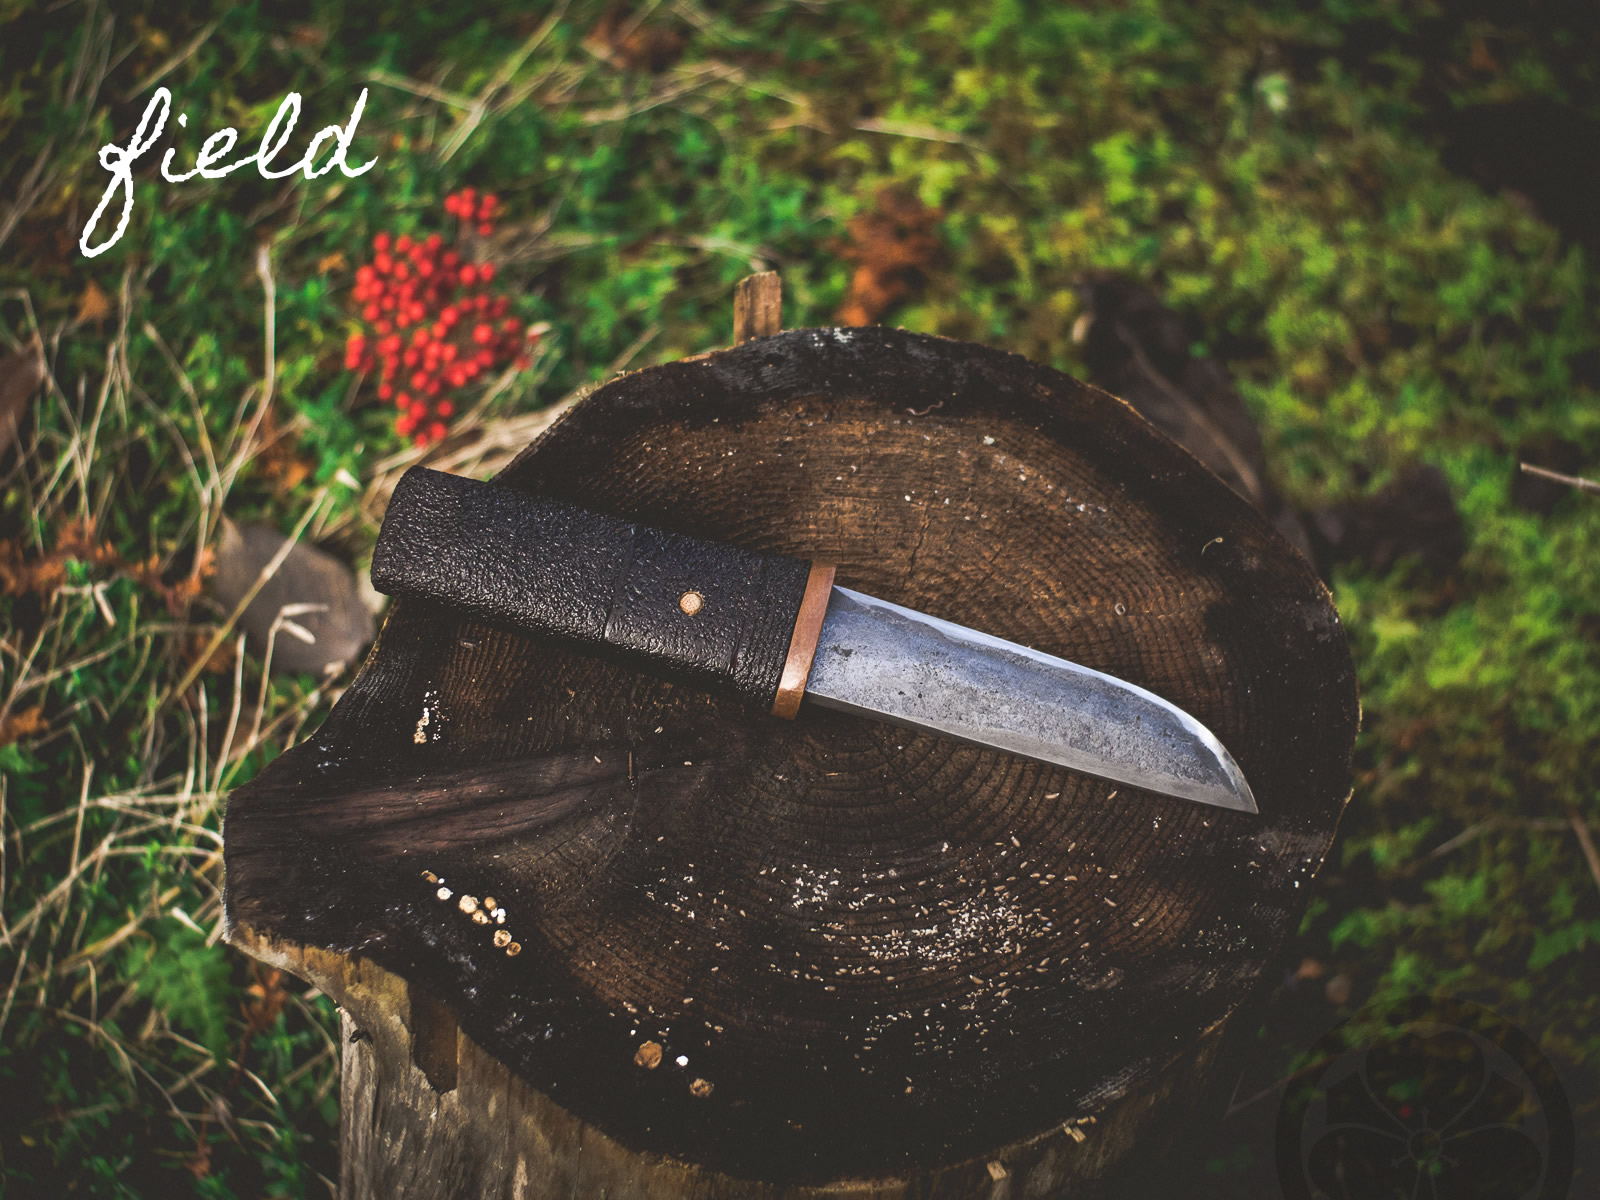 Island Blacksmith: Design your own charcoal forged knives made from reclaimed steel.